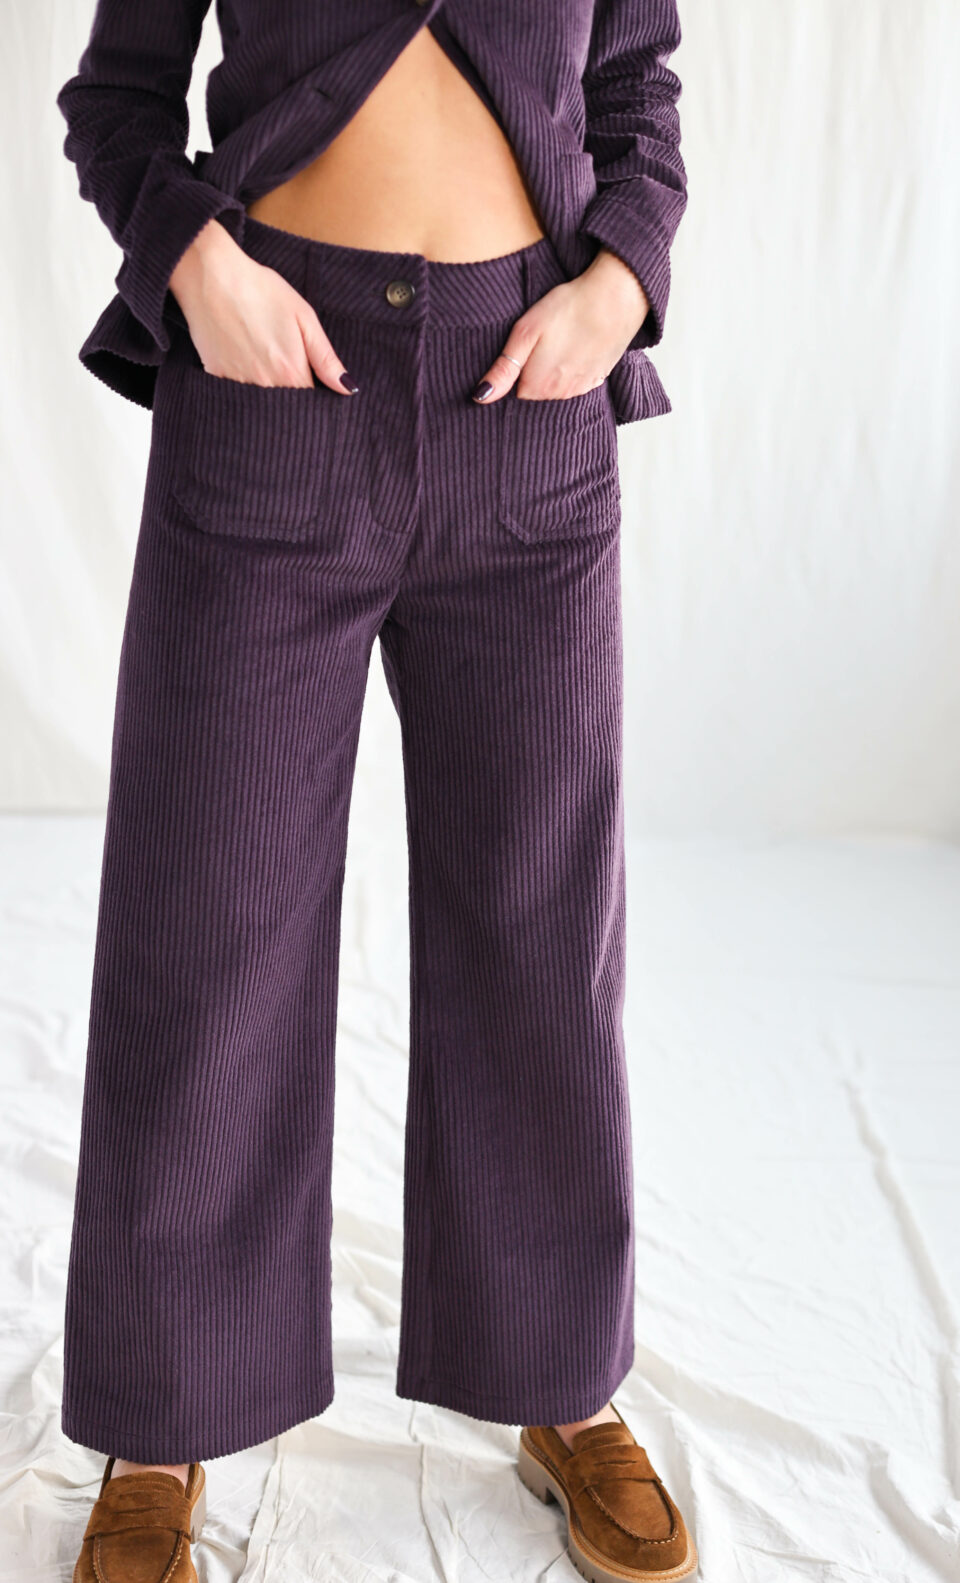 Wide wale cord vintage cut culottes | Trousers | Eggplant | Sustainable clothing | OffOn clothing